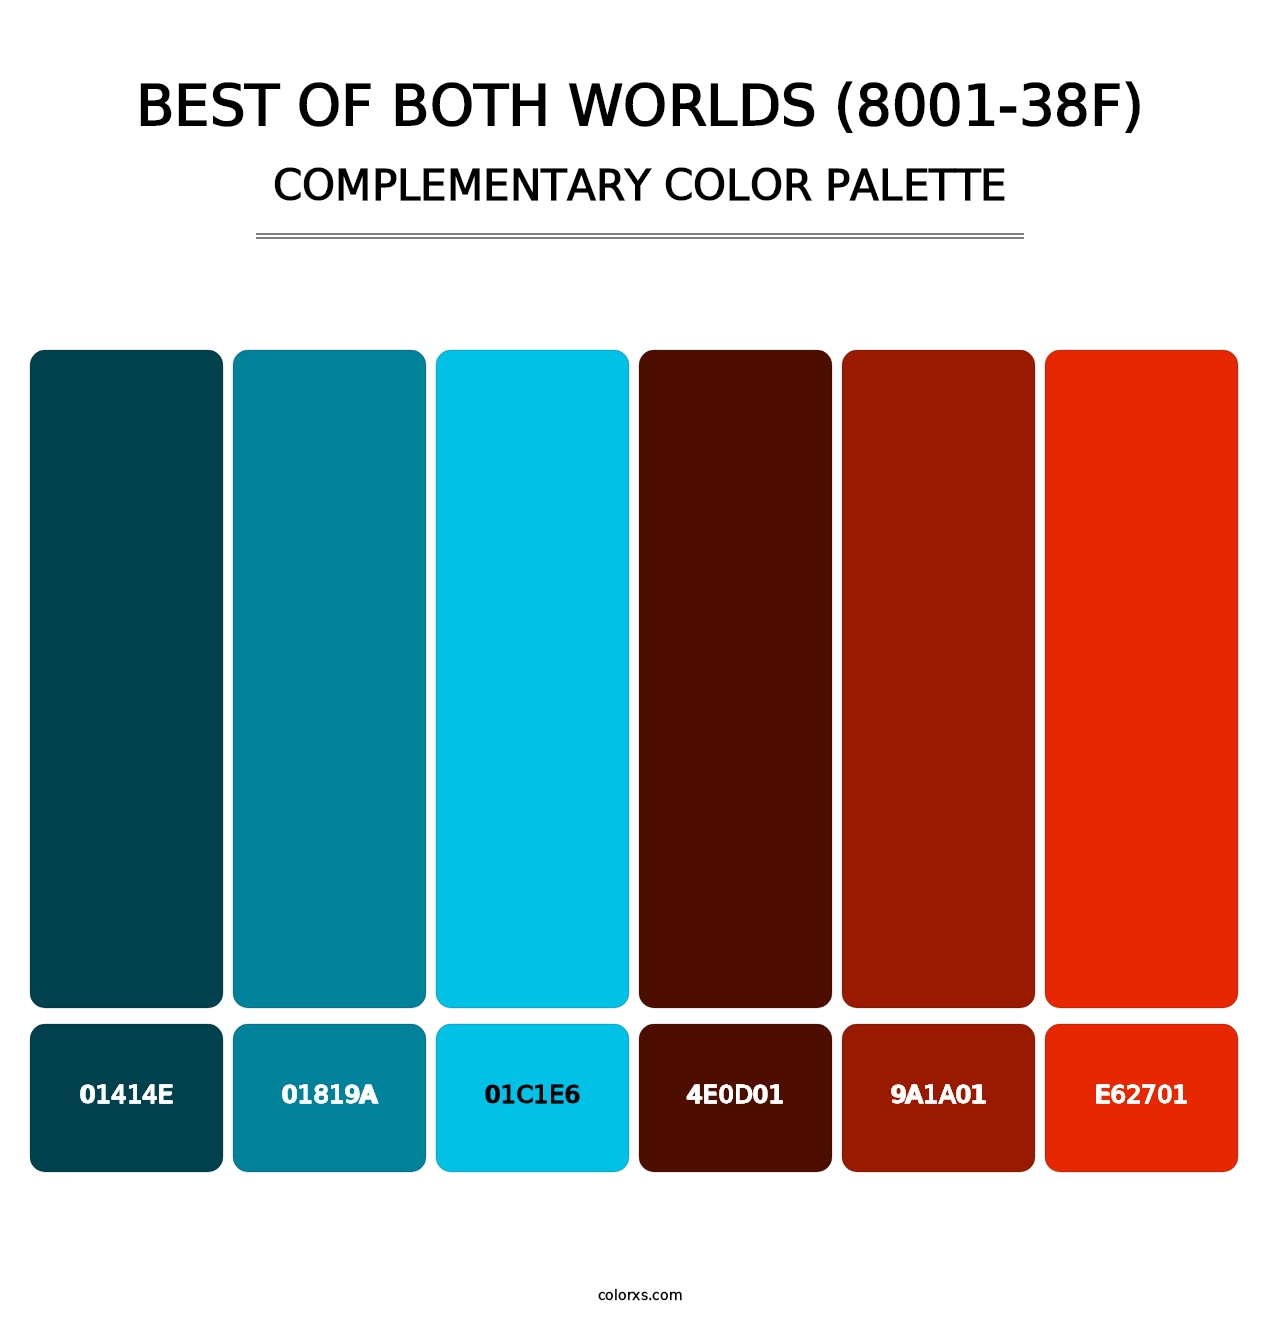 Best of Both Worlds (8001-38F) - Complementary Color Palette